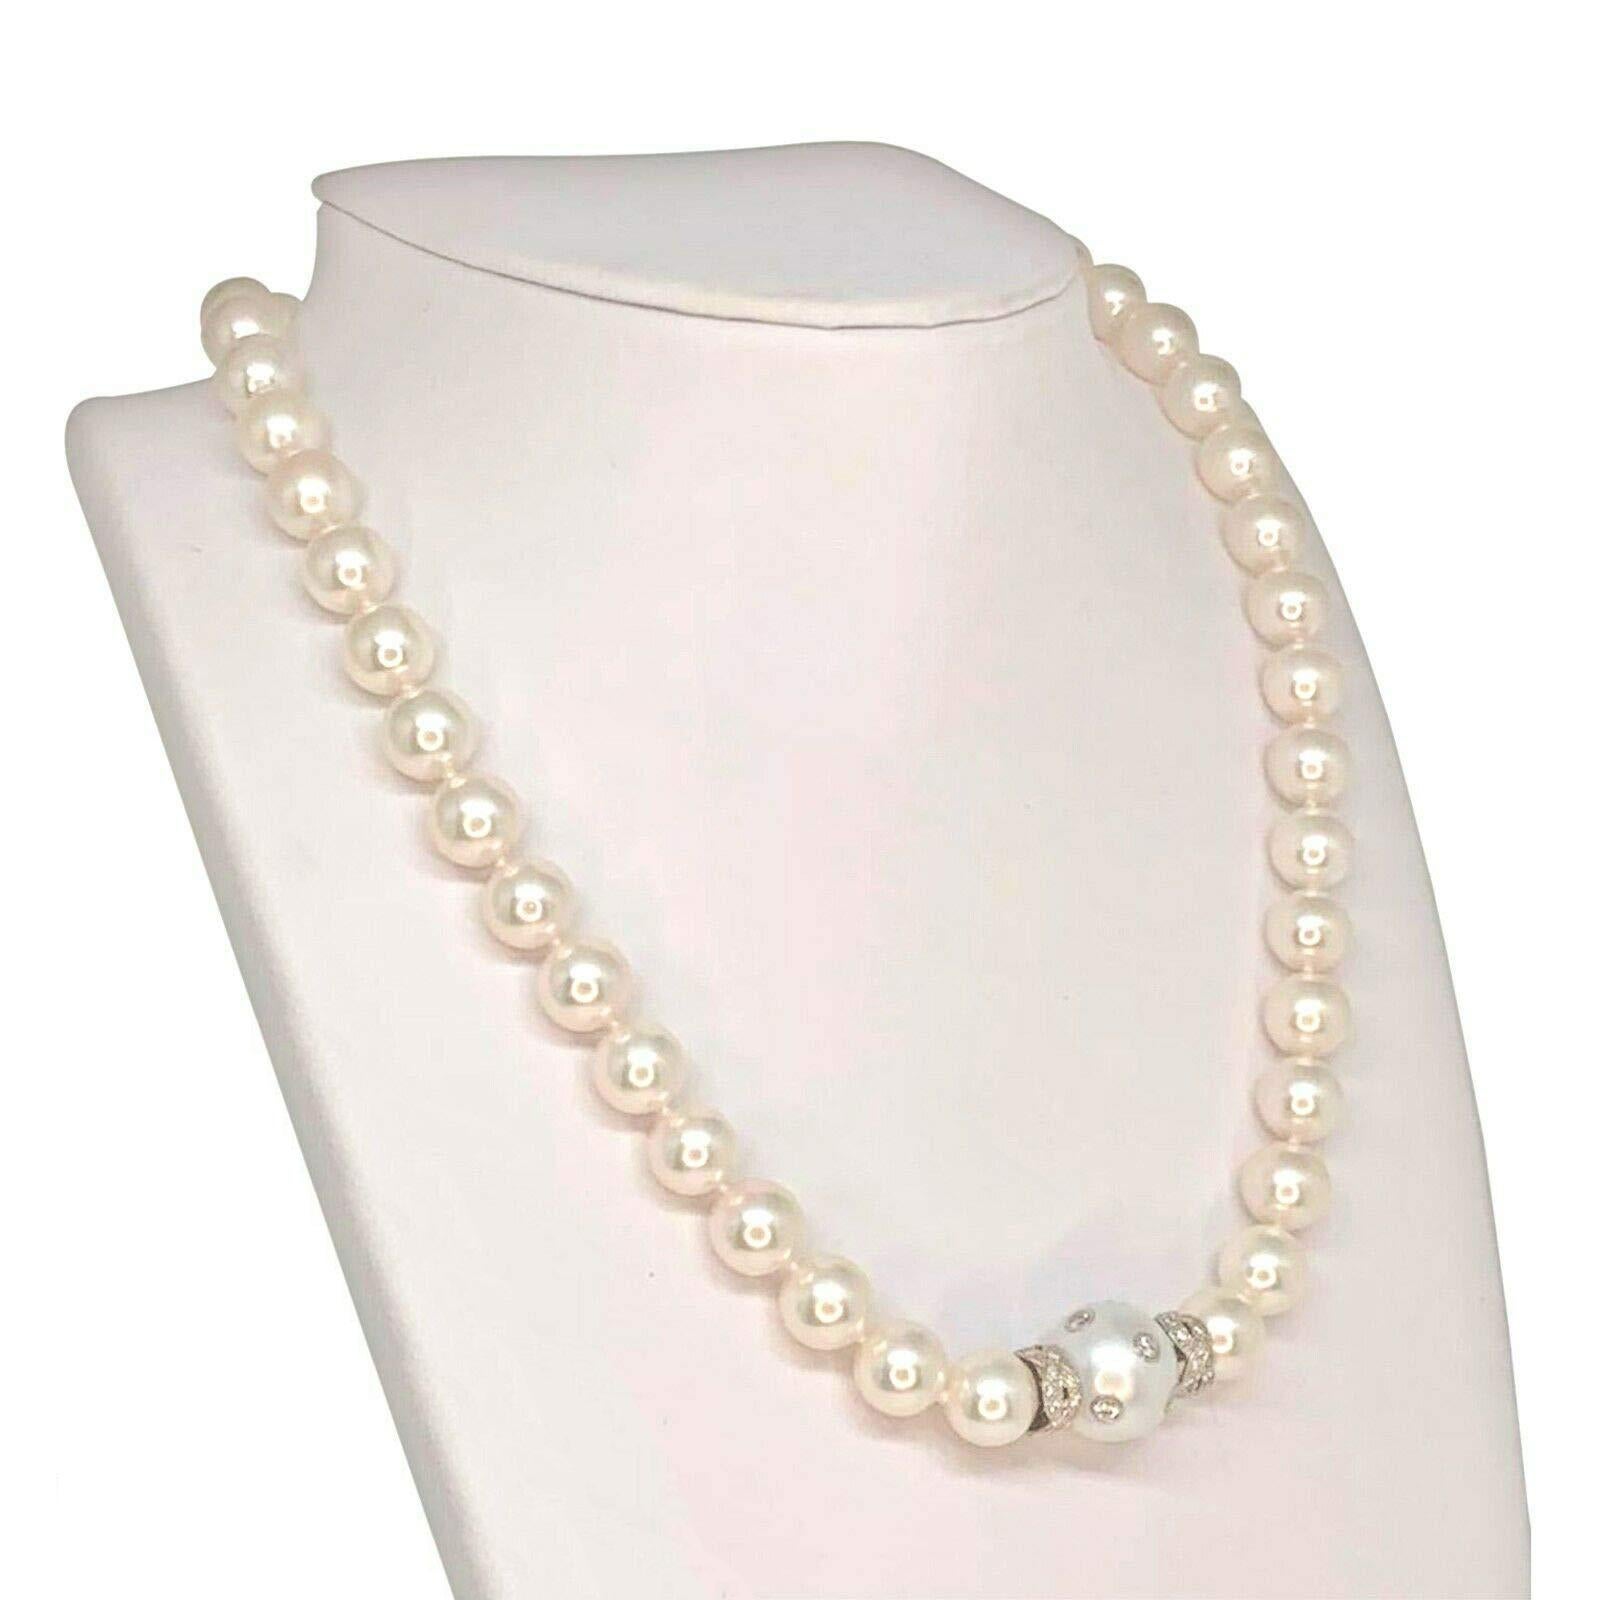 Fine Quality South Sea Akoya Pearl Diamond Necklace 14k Gold 13 mm Certified $12,950 921560

This is a Unique Custom Made Glamorous Piece of Jewelry!

Nothing says, “I Love you” more than Diamonds and Pearls!

This Akoya pearl necklace has been